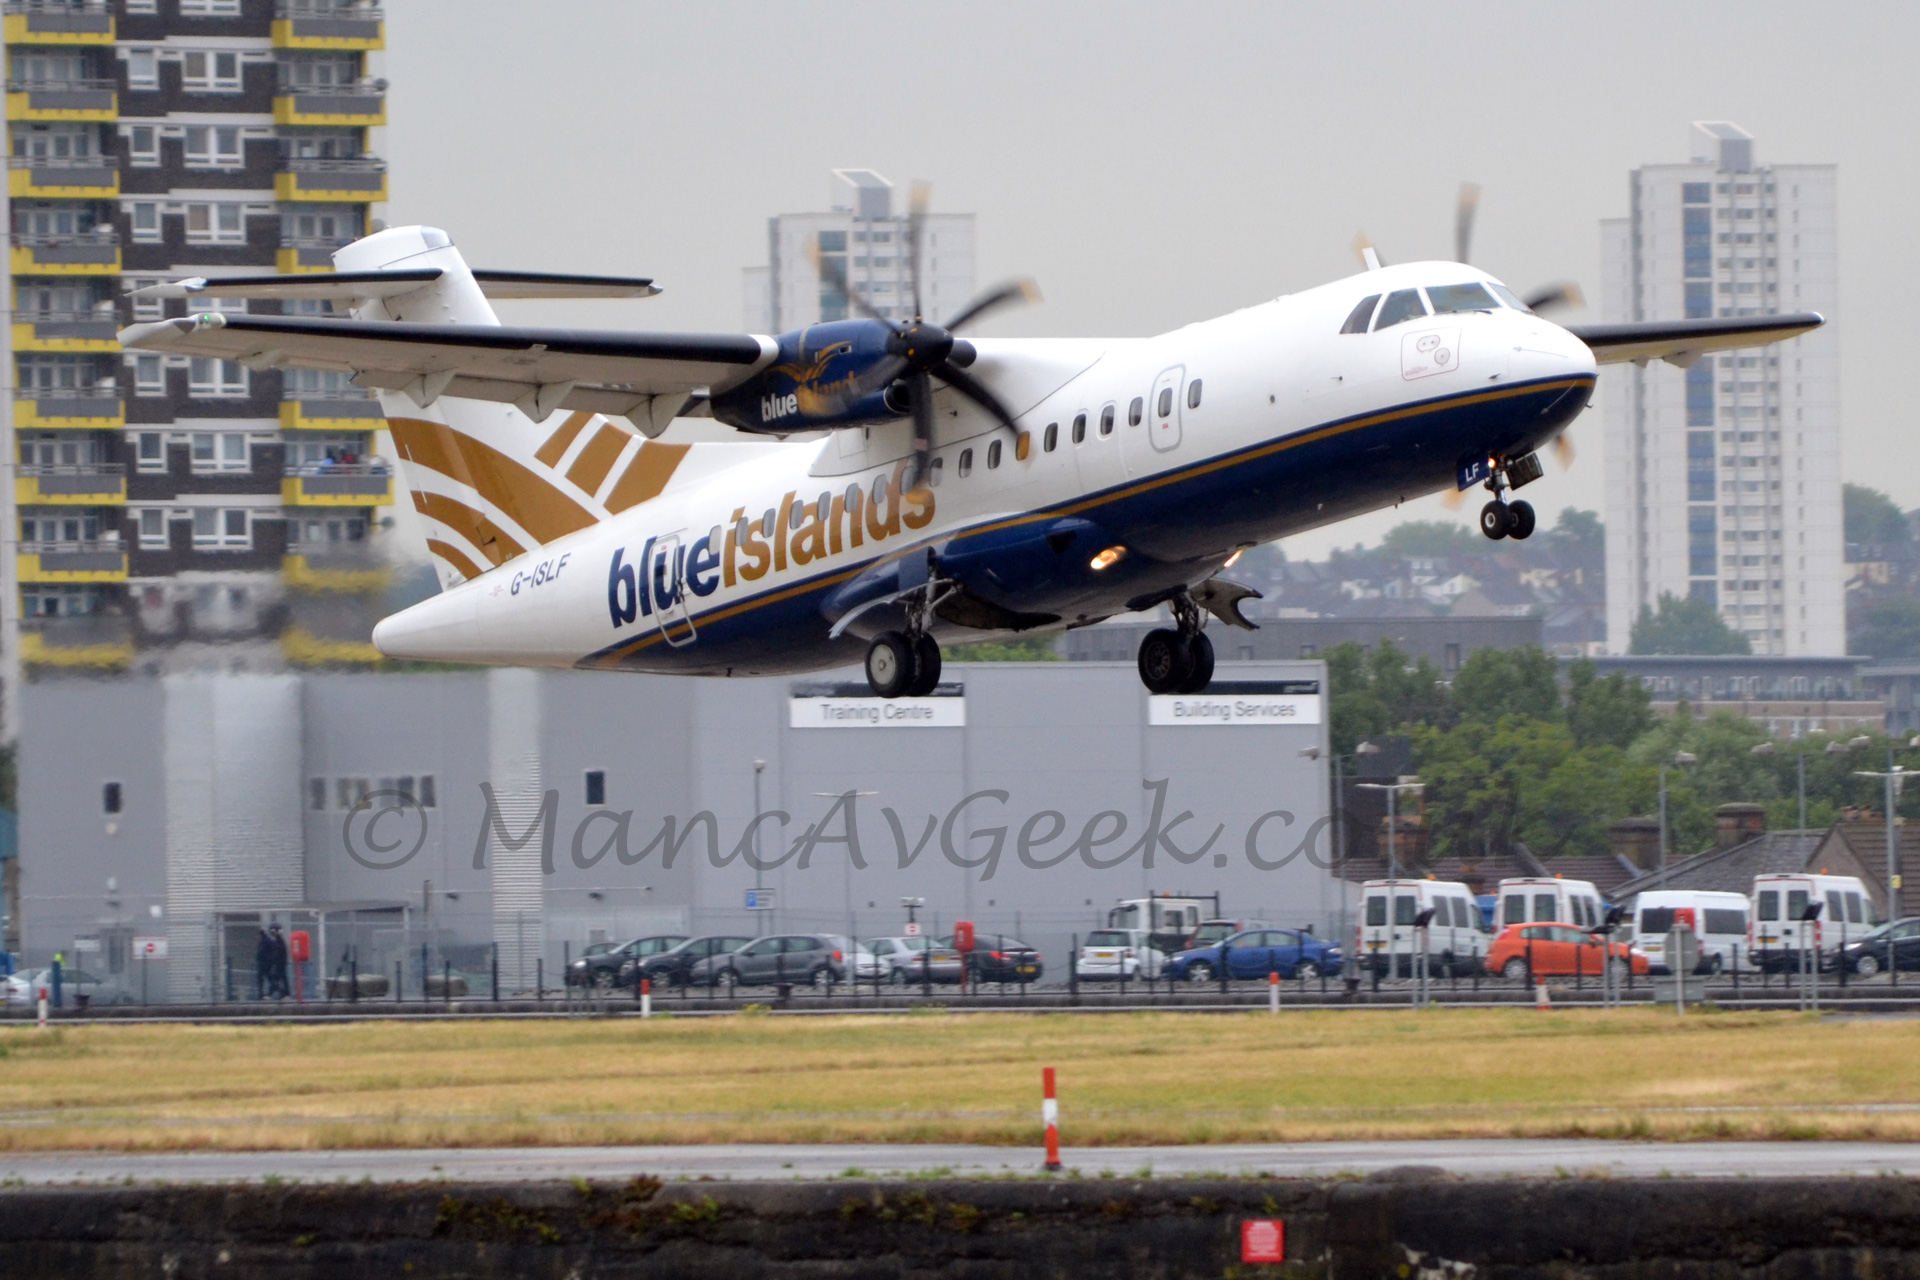 Side view of a high-winged, twin propellor-engined airliner flying from left to right at a very low altitude with it's undercarriage lowered and flaps extended from behind the wings, and the nose raised sharply, suggesting it has just taken off.. The plane is mostly white, with a blue belly, and a golden stripe running along the body. There are large blue and gold "blue islands" titles on the rear fuselage, with the registration "G-ISLF" under the tail. The engine pods are blue, with white and gold "blue islands" titles. The tail is white, with some ciurved golden stripes. In the background, grass stretches off in to the distance, with some cars parked in front of a large grey building beyond that. Hi-rise tower blocks dominate the skyline, under a dreary grey sky.